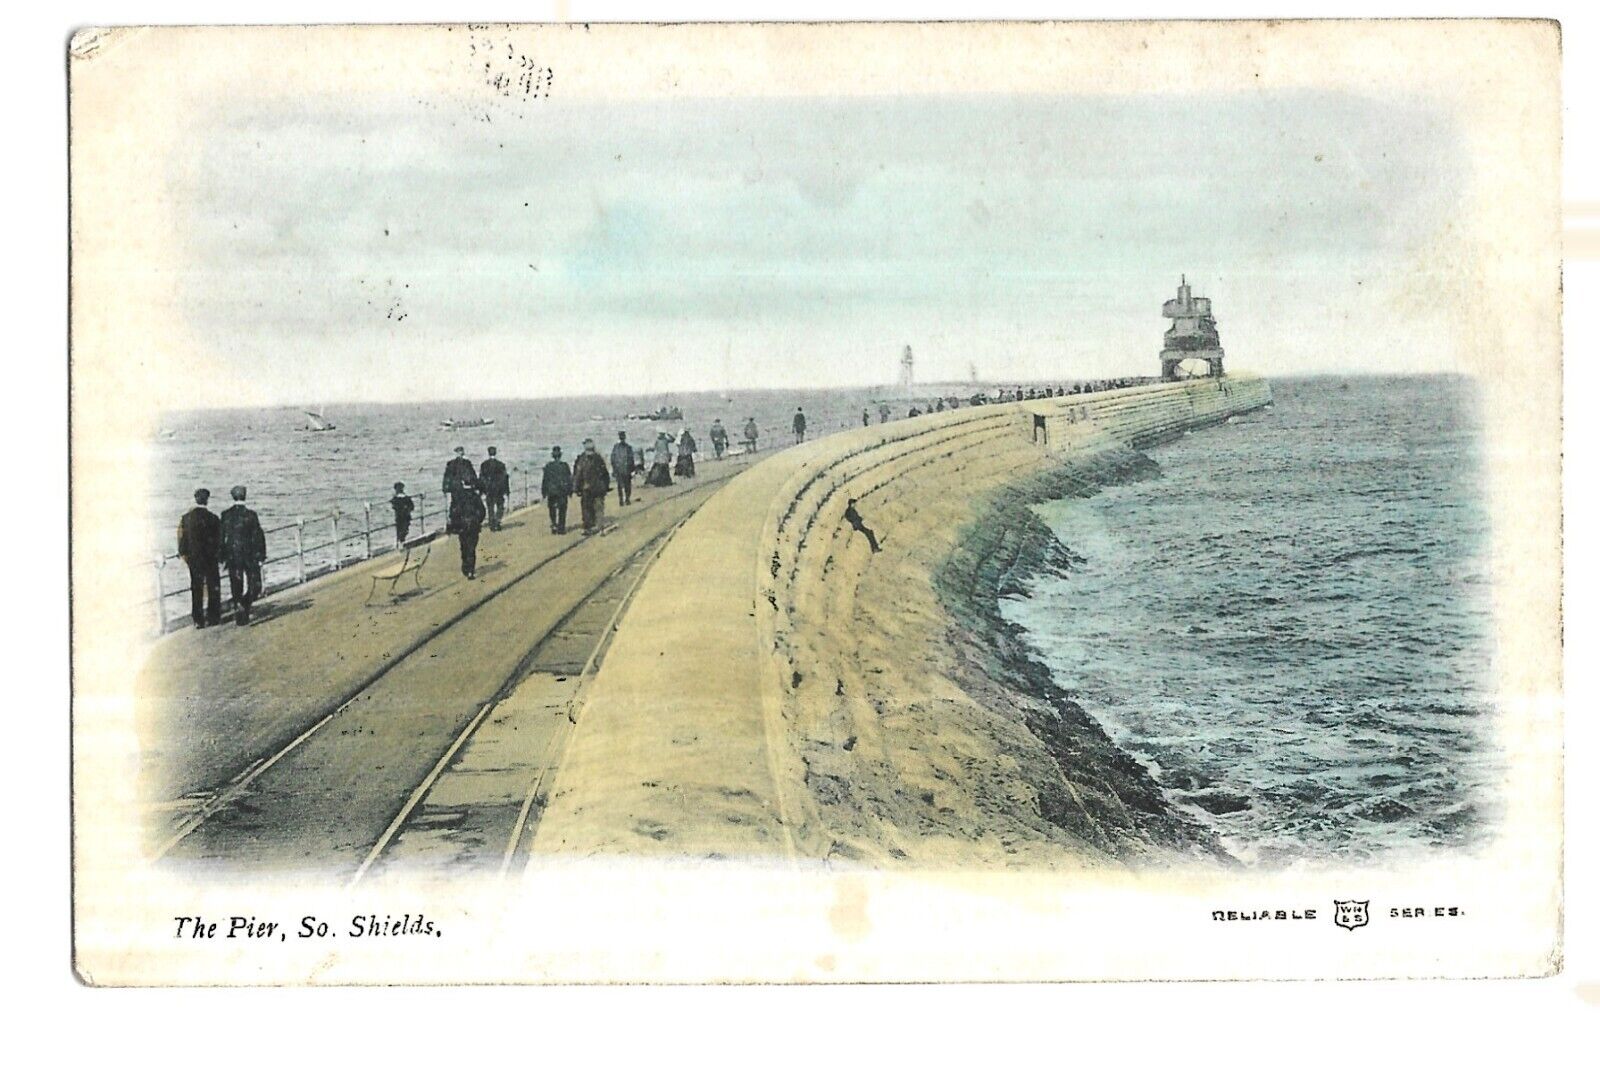 House Clearance - Durham. The Pier, South Shields. Posted at South Shields in 1905.